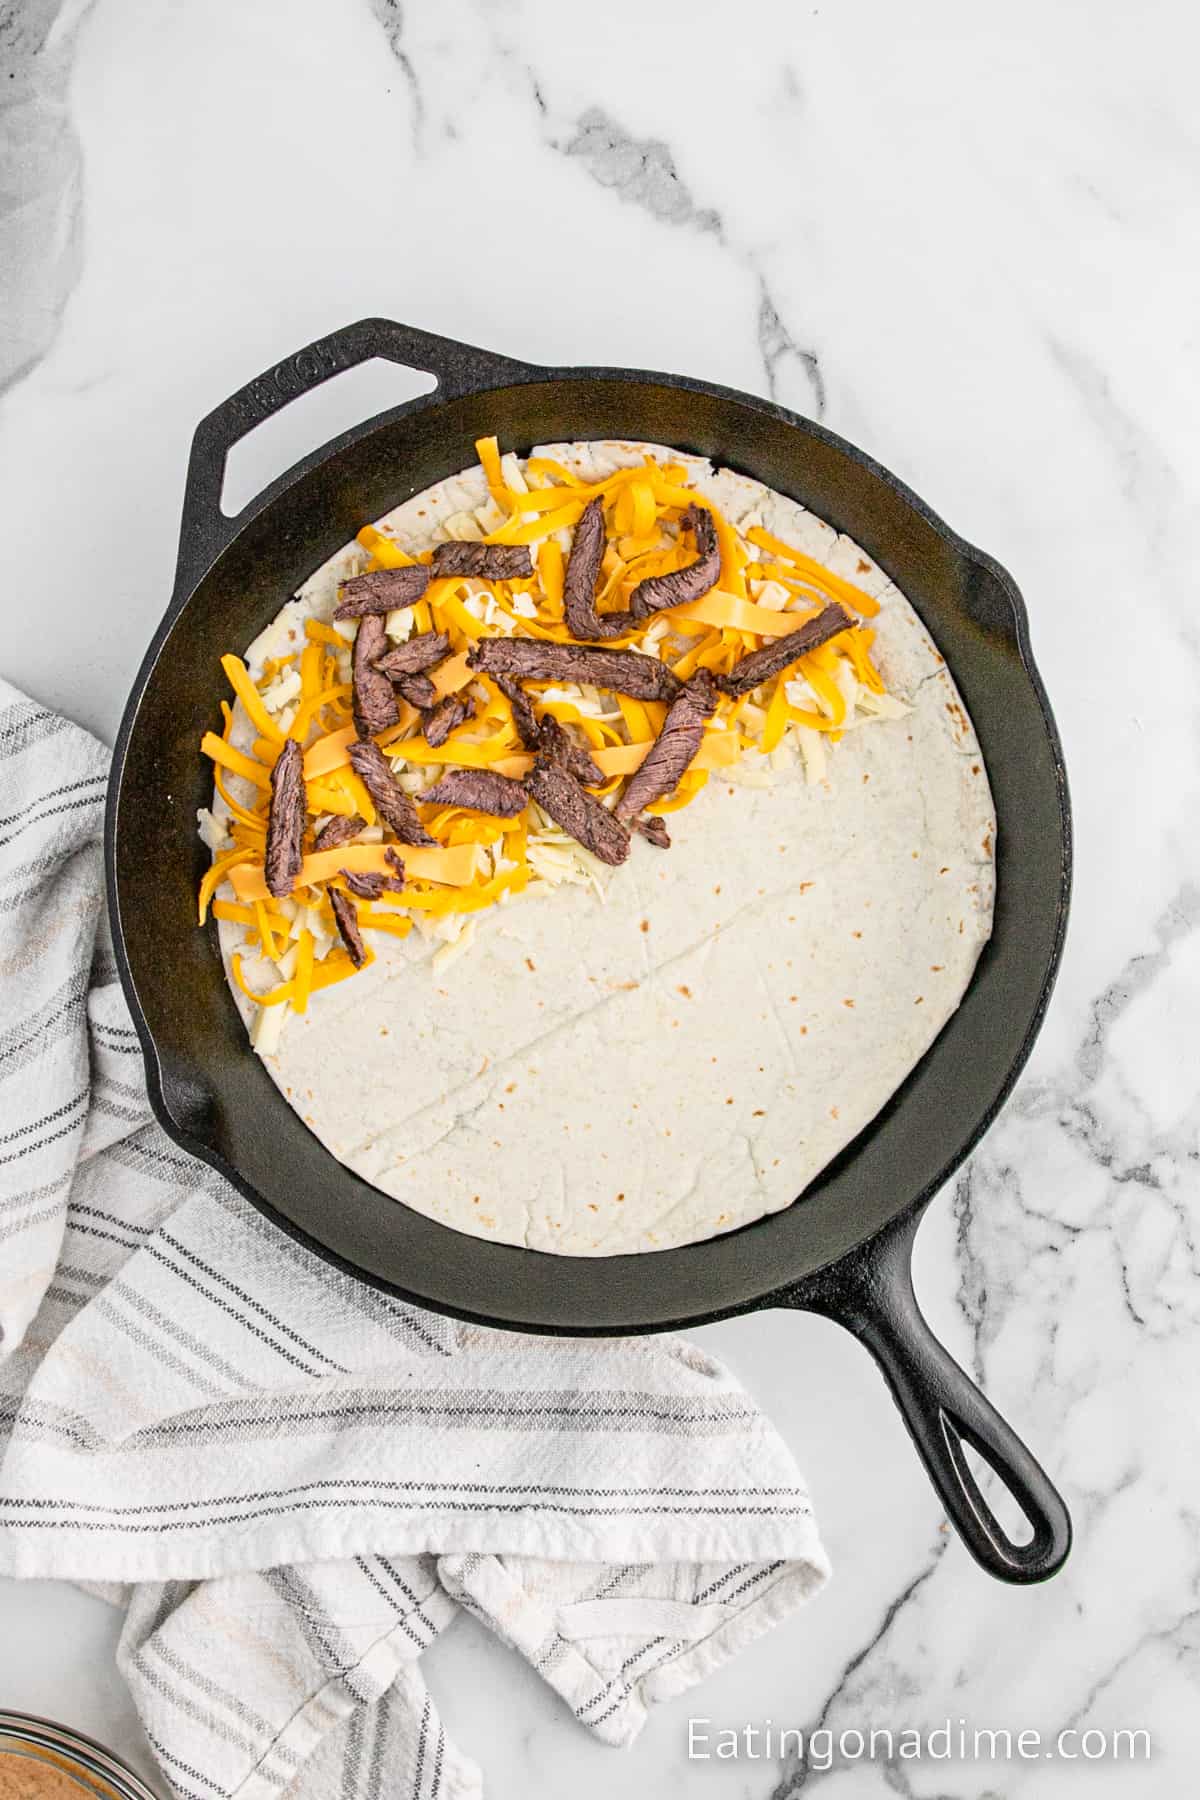 Flour tortilla in cast iron skillet topped with shredded cheese and steak strips